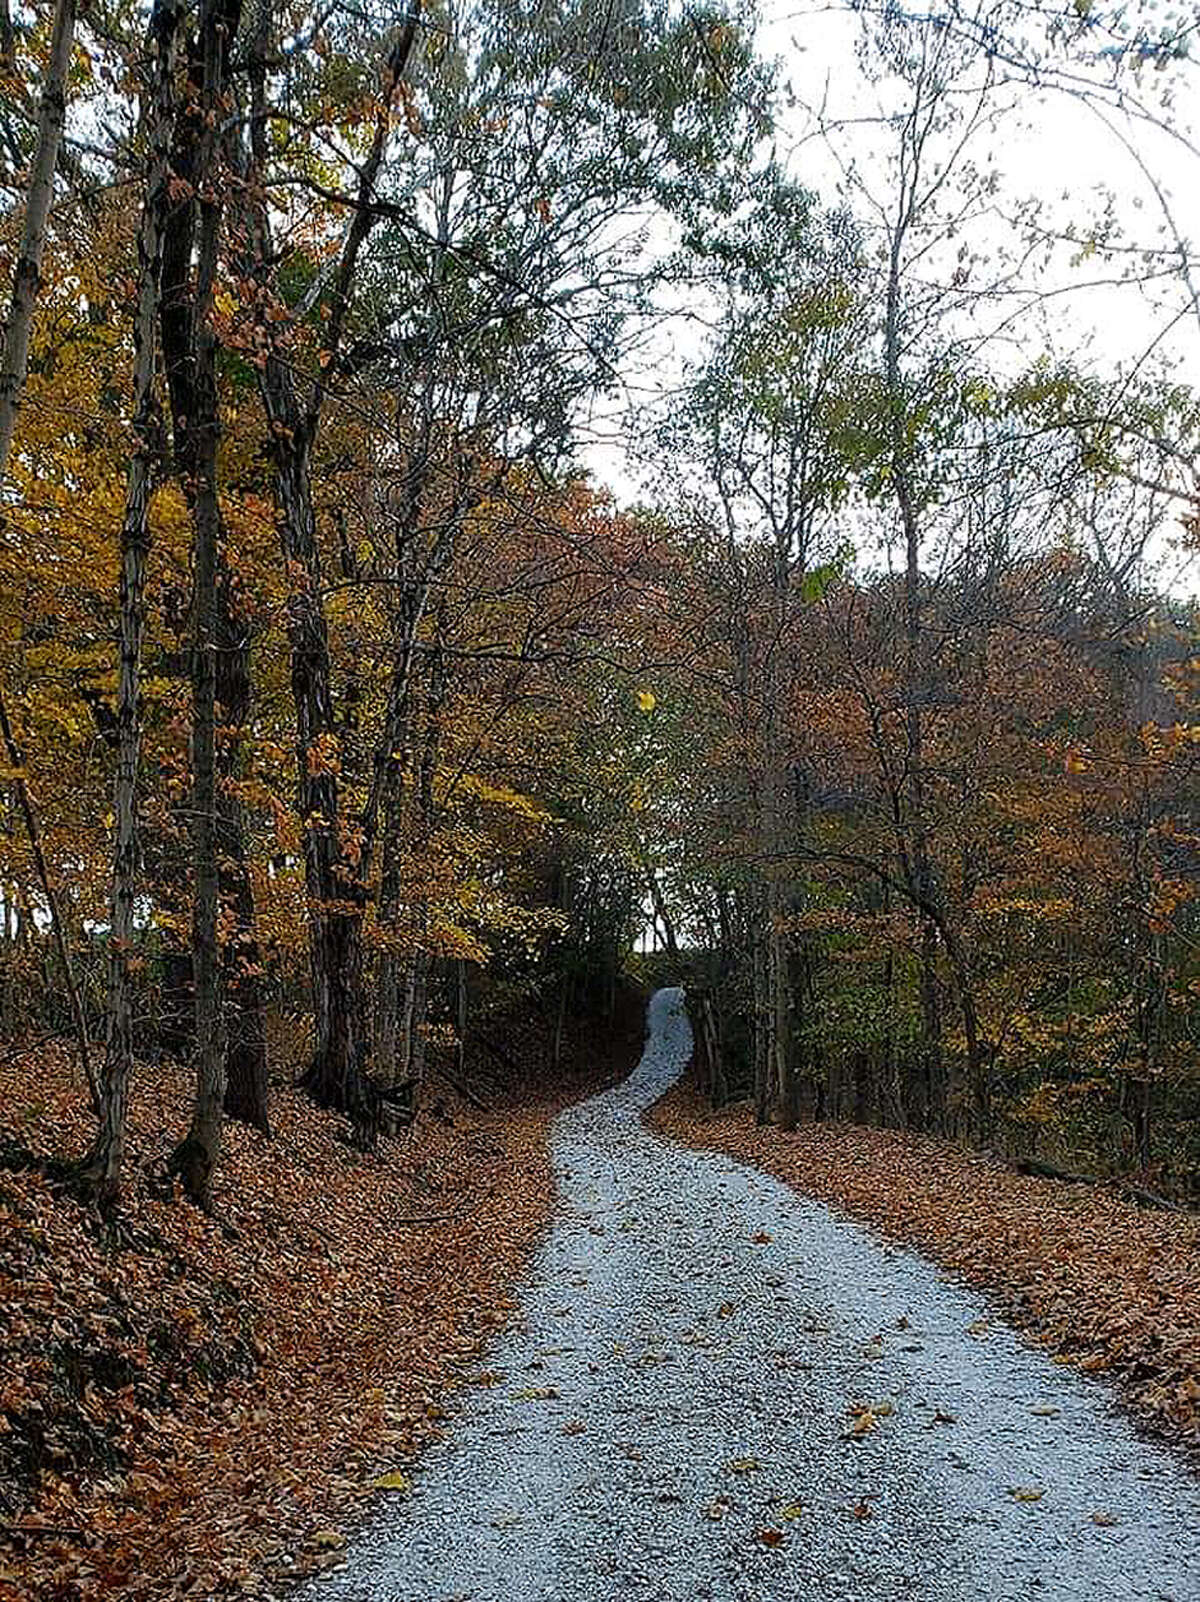 The muted colors of leaves on trees along a quiet, rural Brown County road are a reminder of winter's approach.